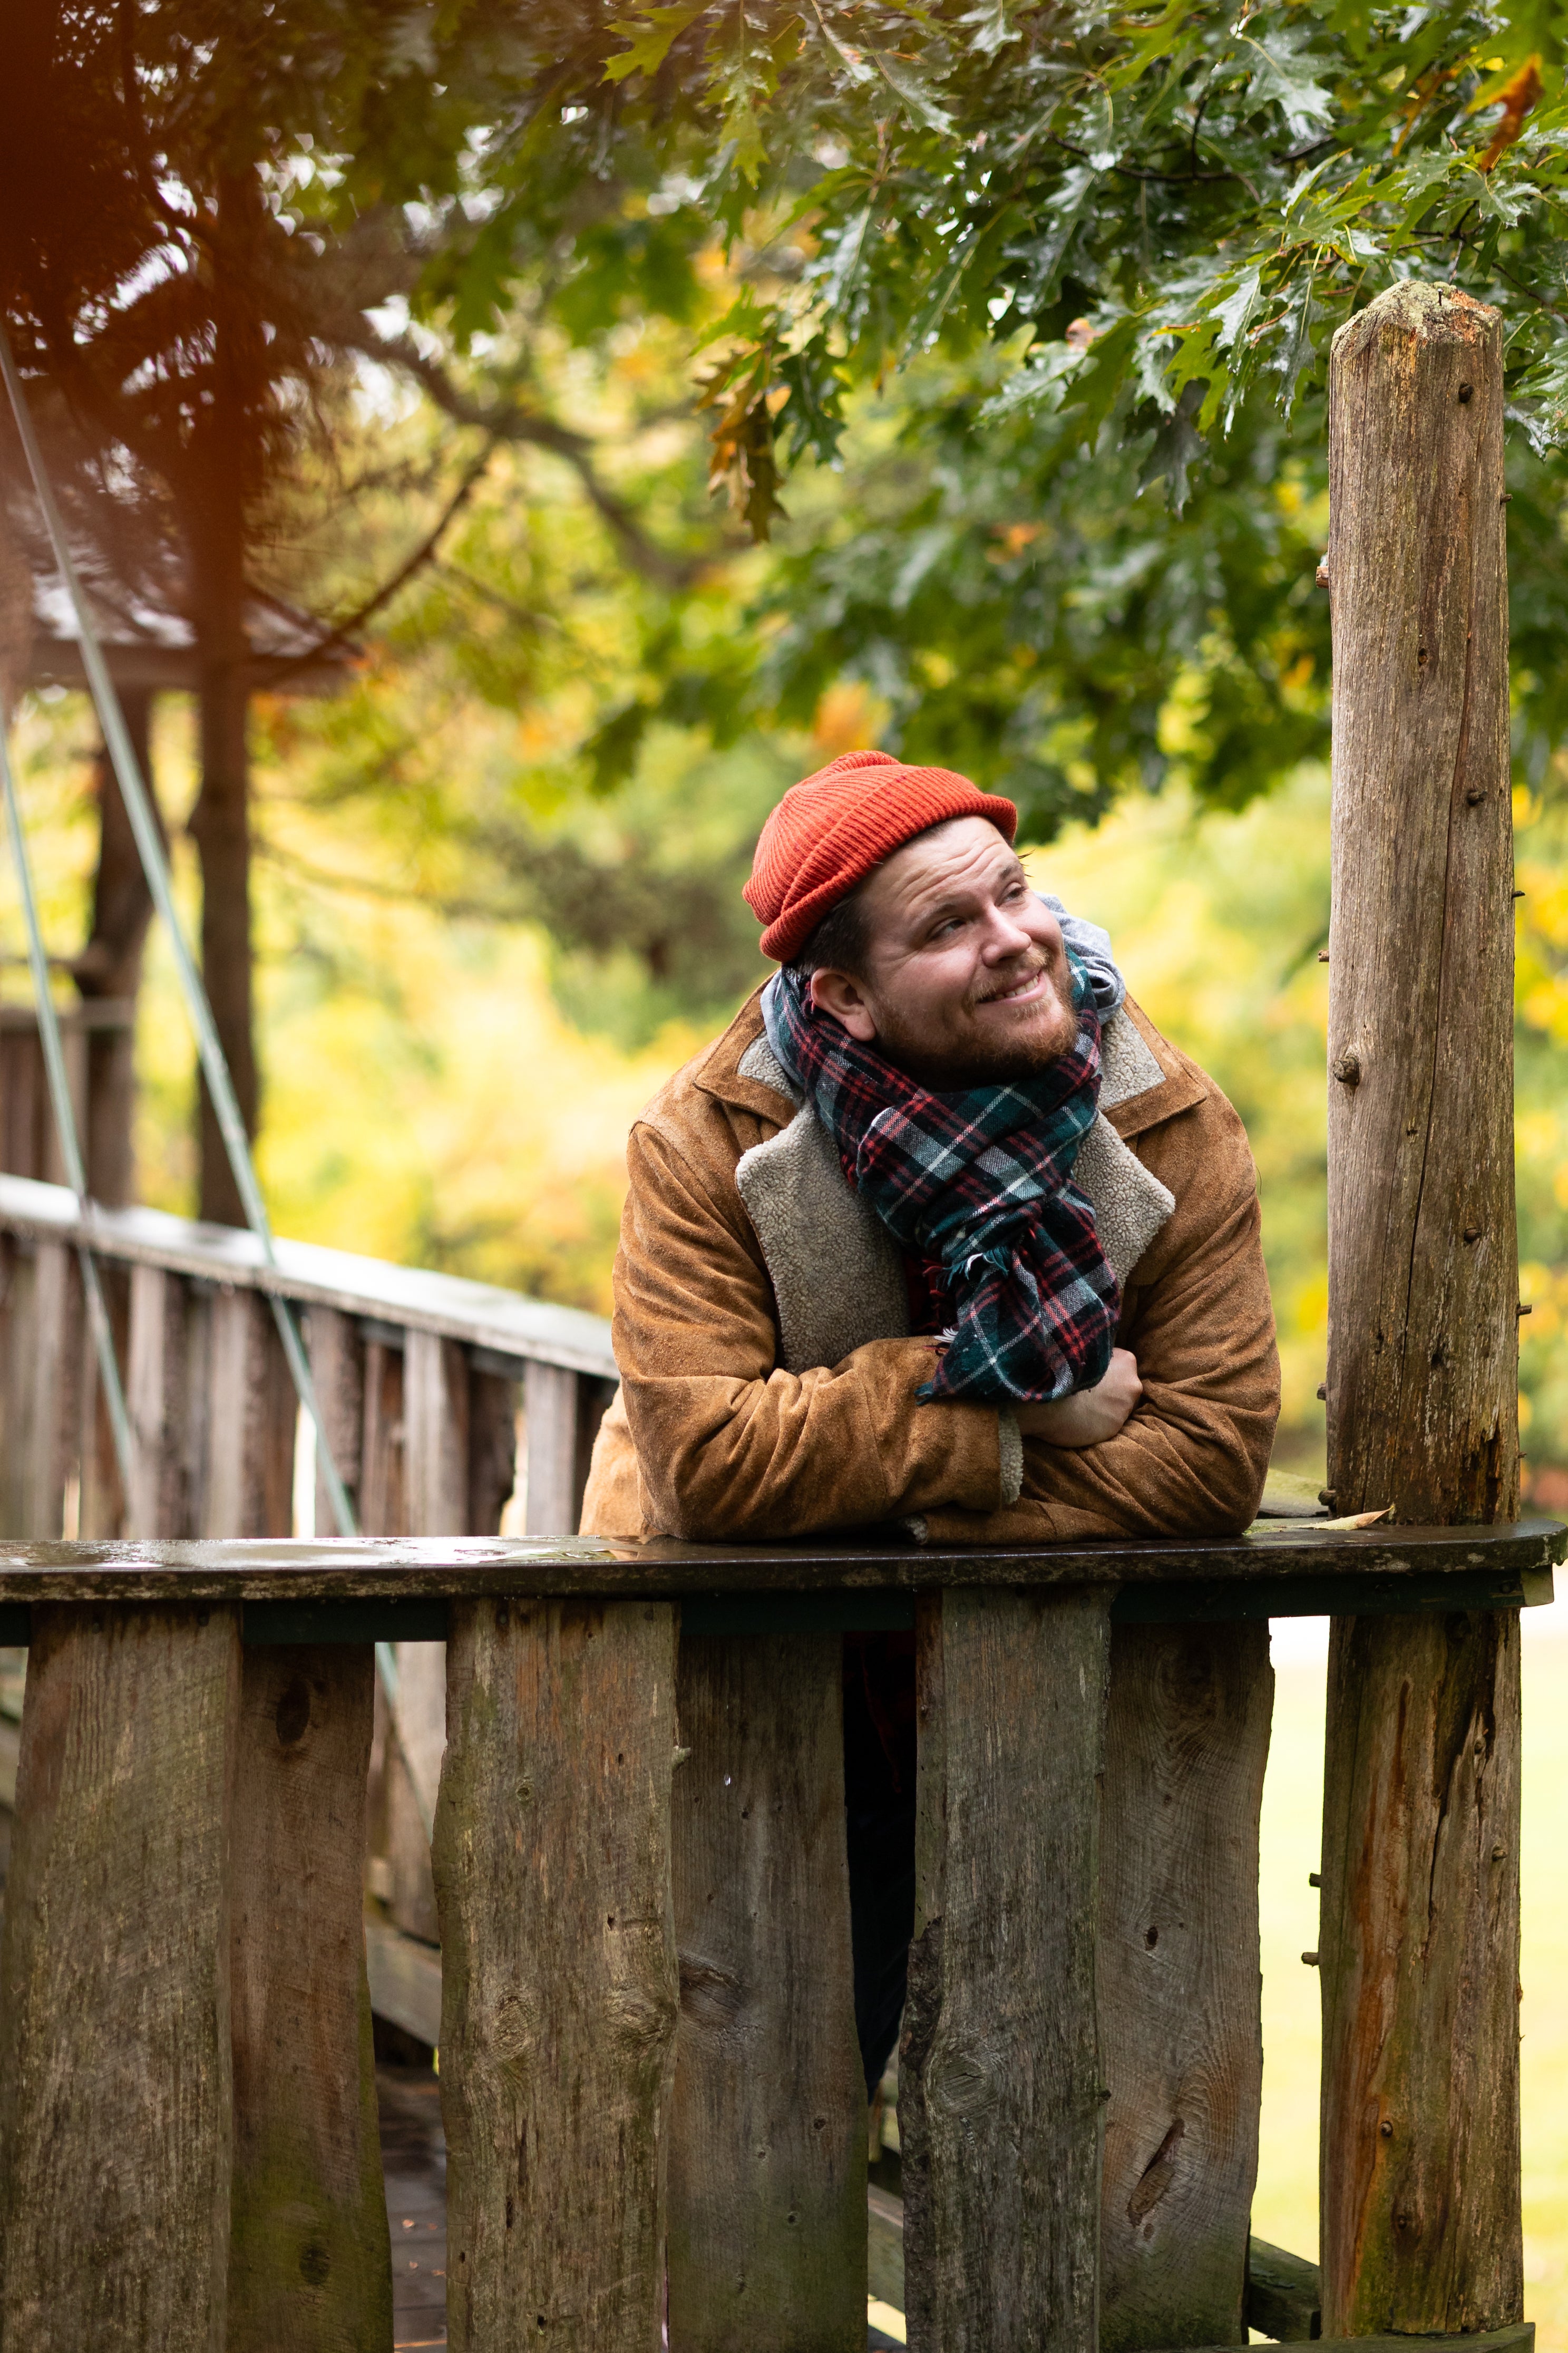 Luke, wearing a beanie, leans against a wooden rail and looks upward, smiling faintly.